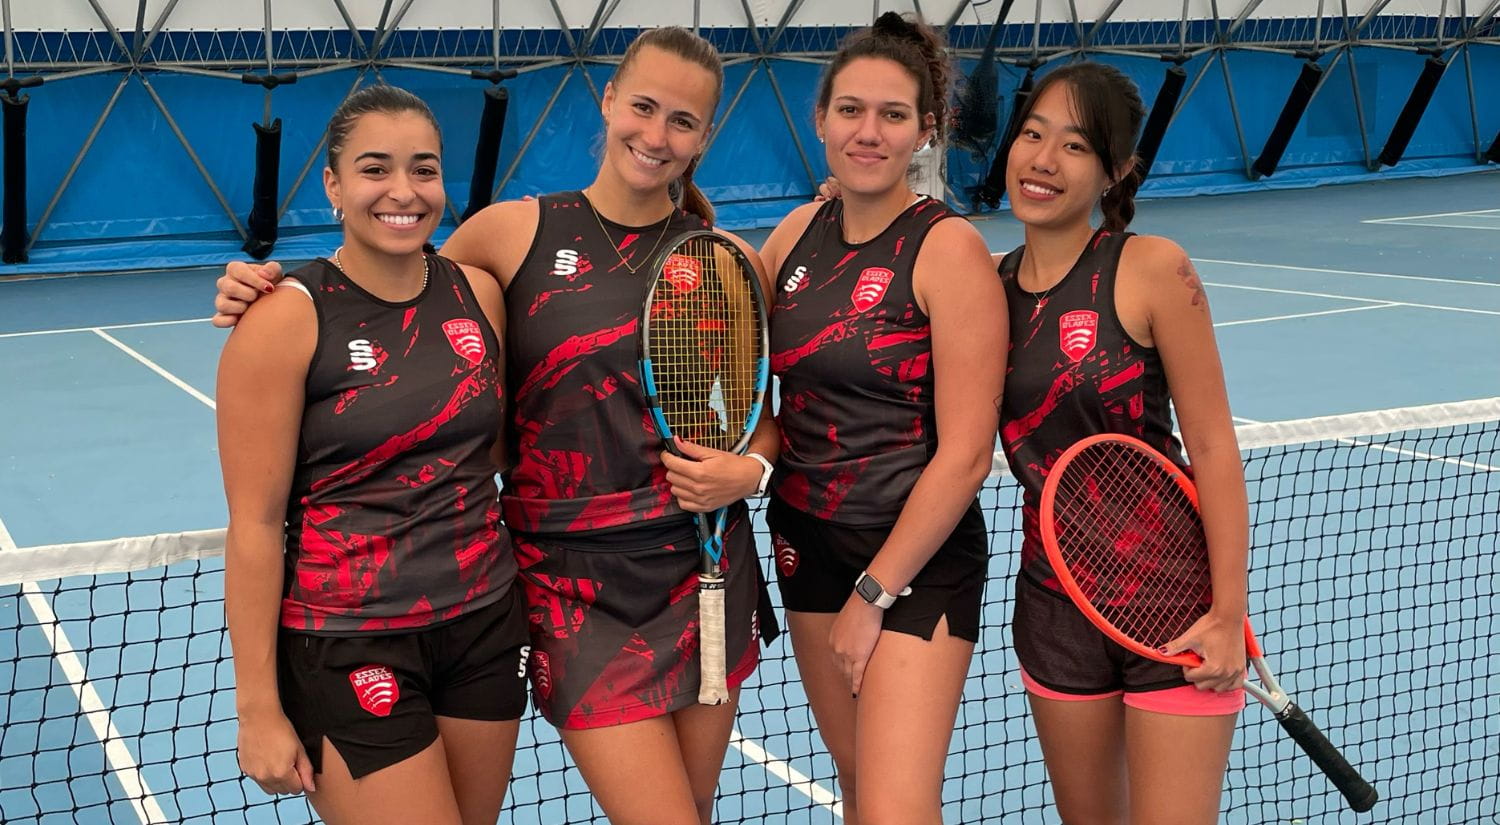 The women's tennis team after winning in Portsmouth 